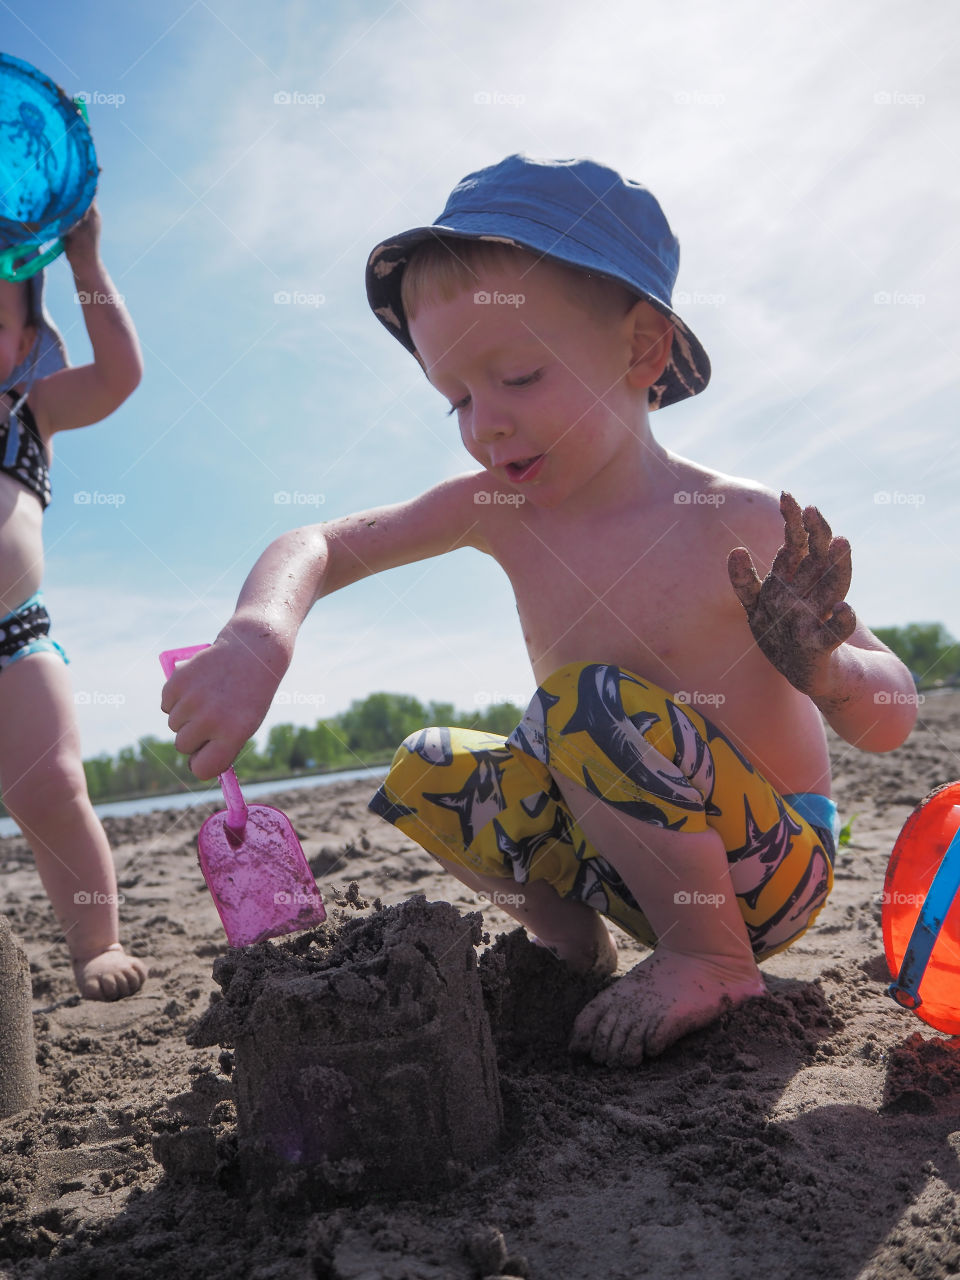 Toddler boy smashing his sandcastle with a pink shovel.